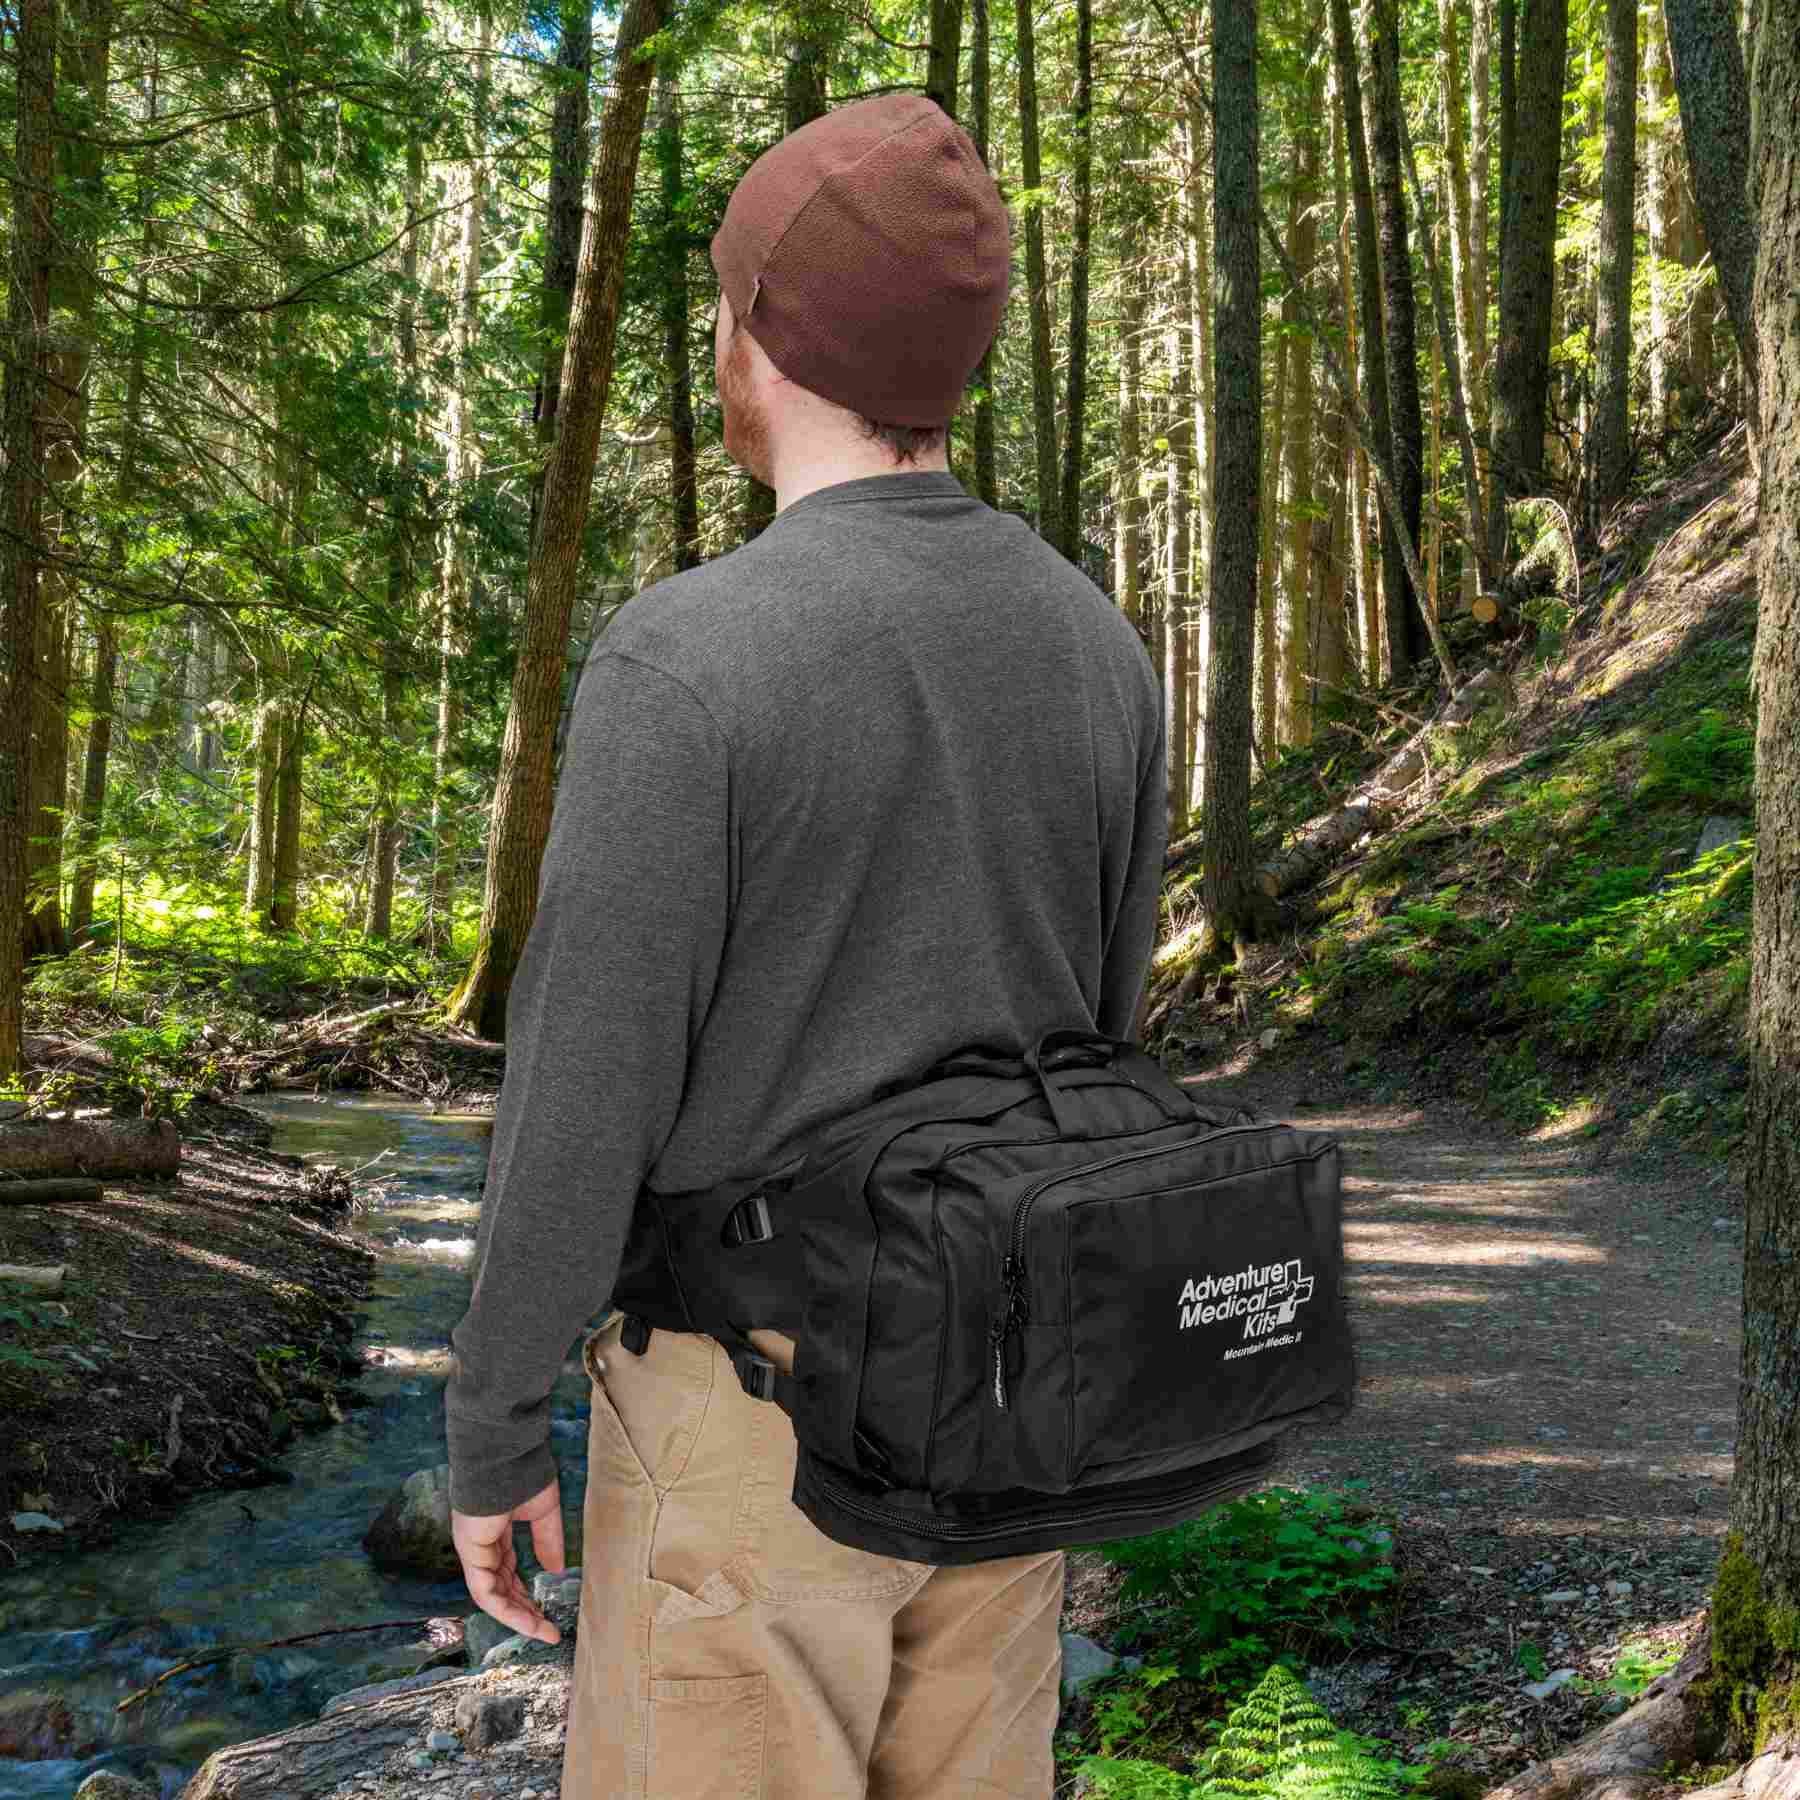 Pro Series Emergency Medical Kit - Mountain Medic II attached to man's waist while hiking